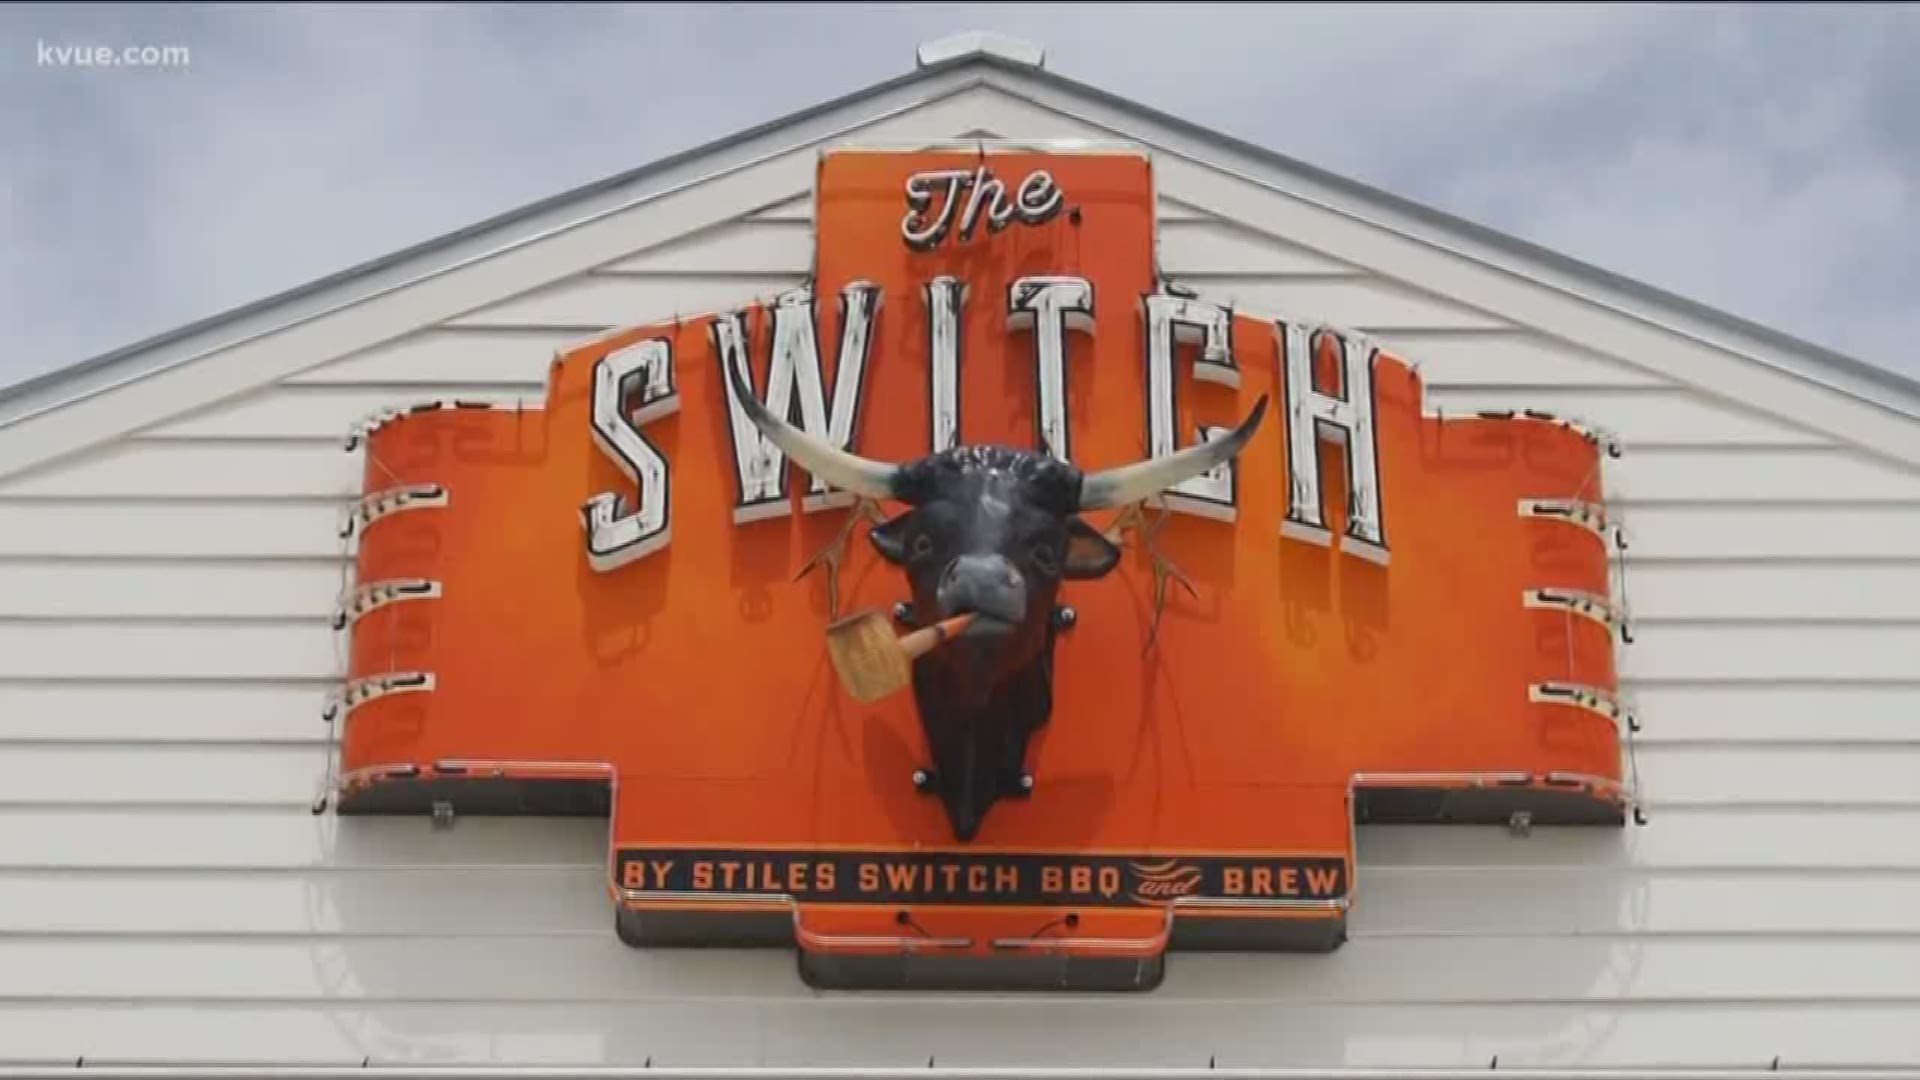 We sent reporter Brittany Flowers to The Switch in Austin, Texas to try some barbecue.